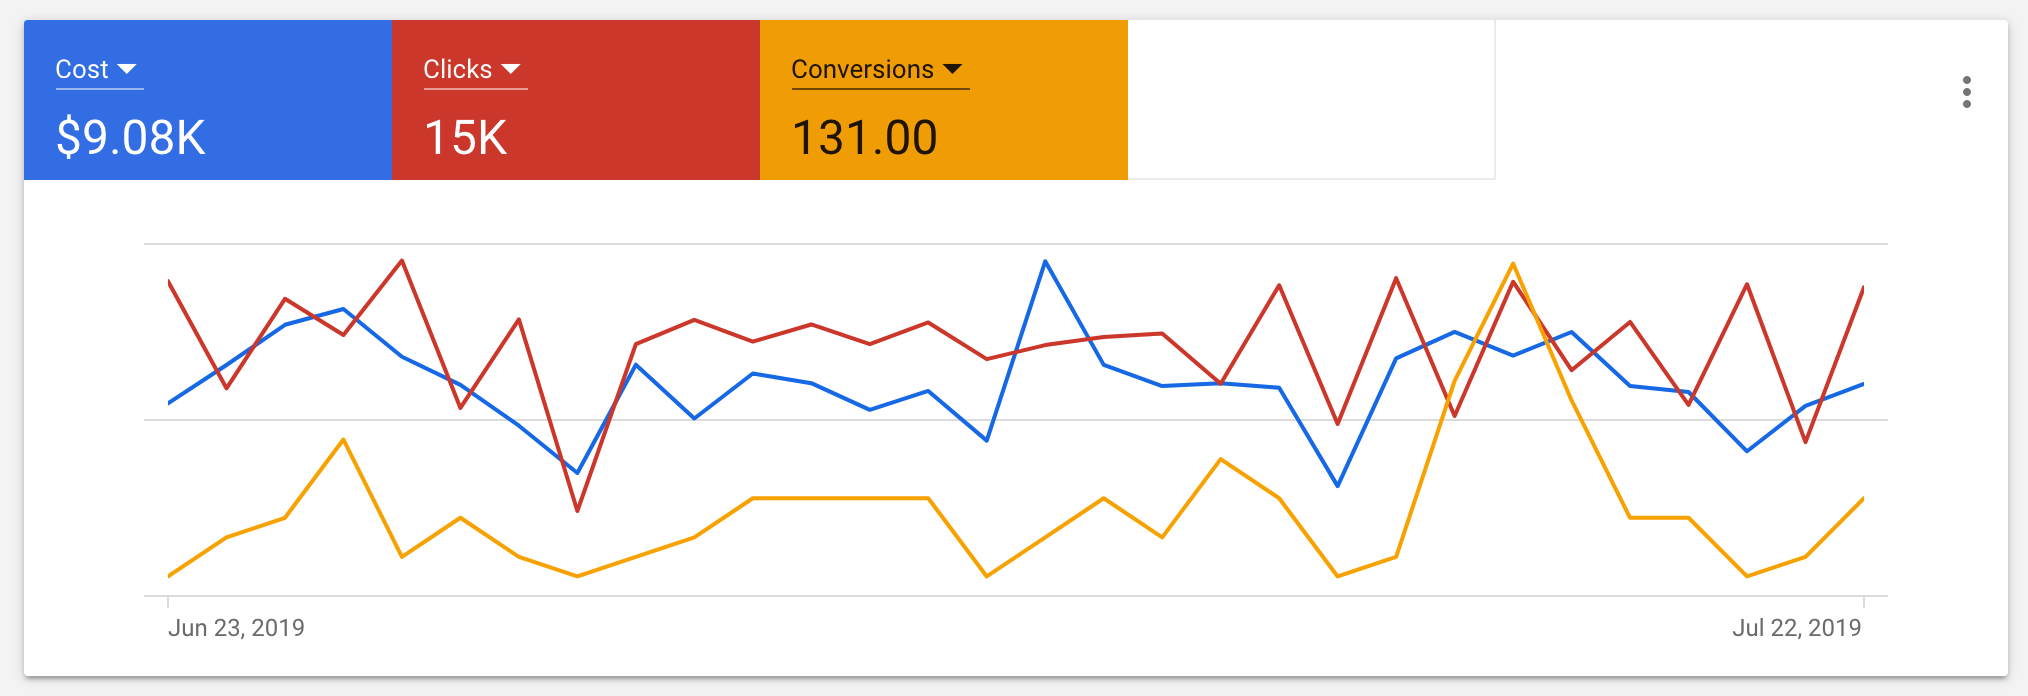 google ads conversions for local lead gen